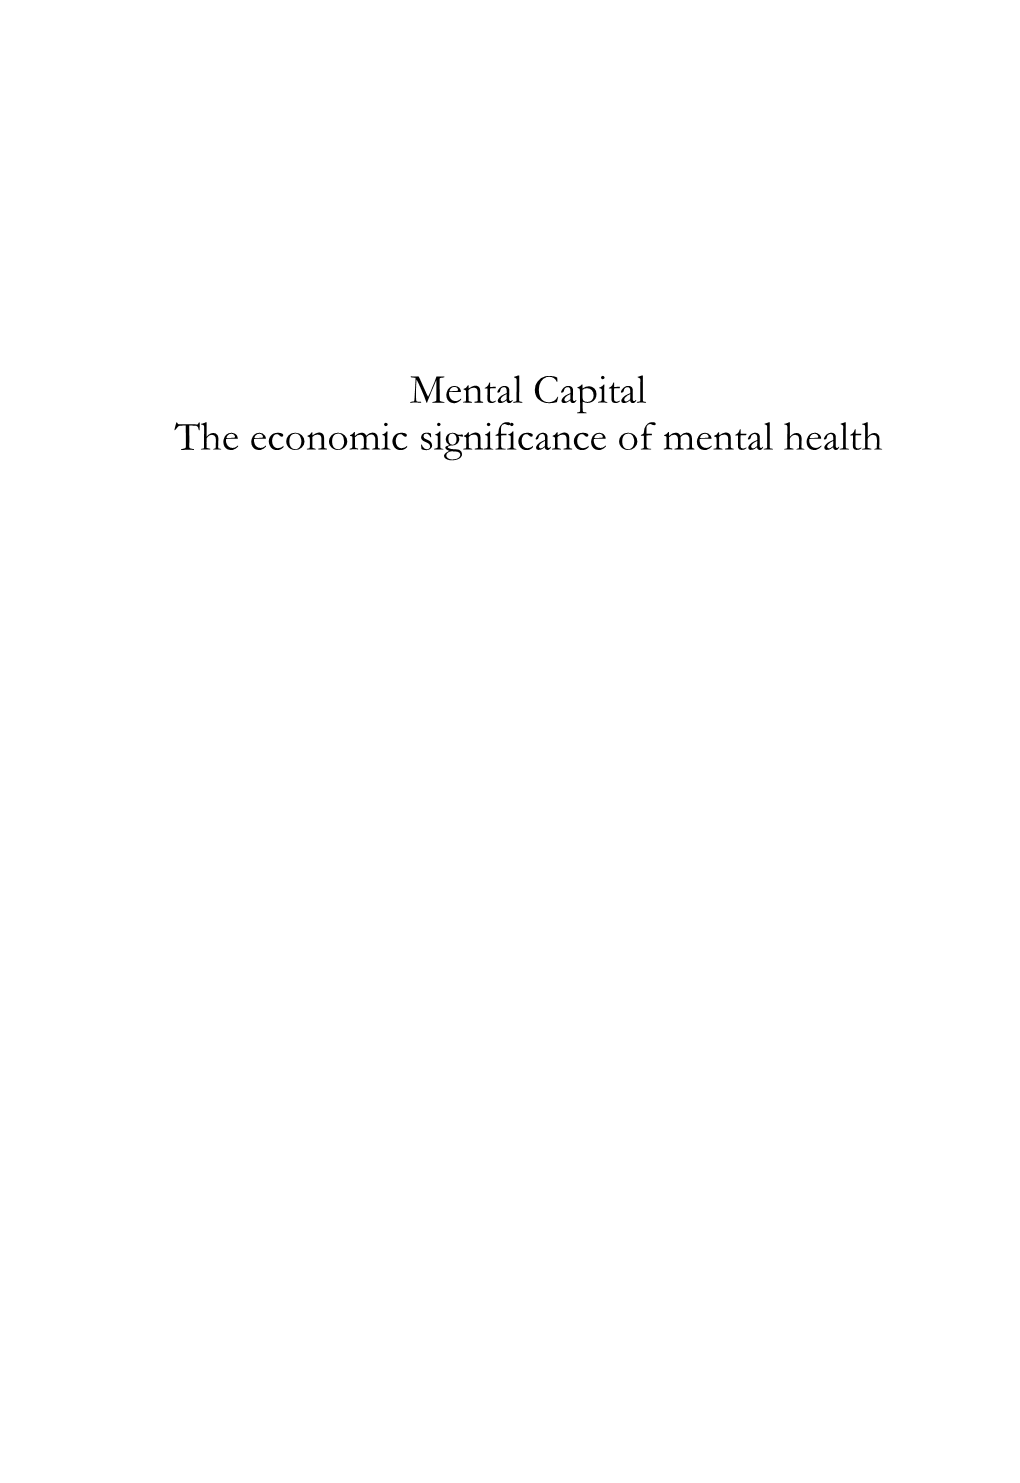 Mental Capital the Economic Significance of Mental Health